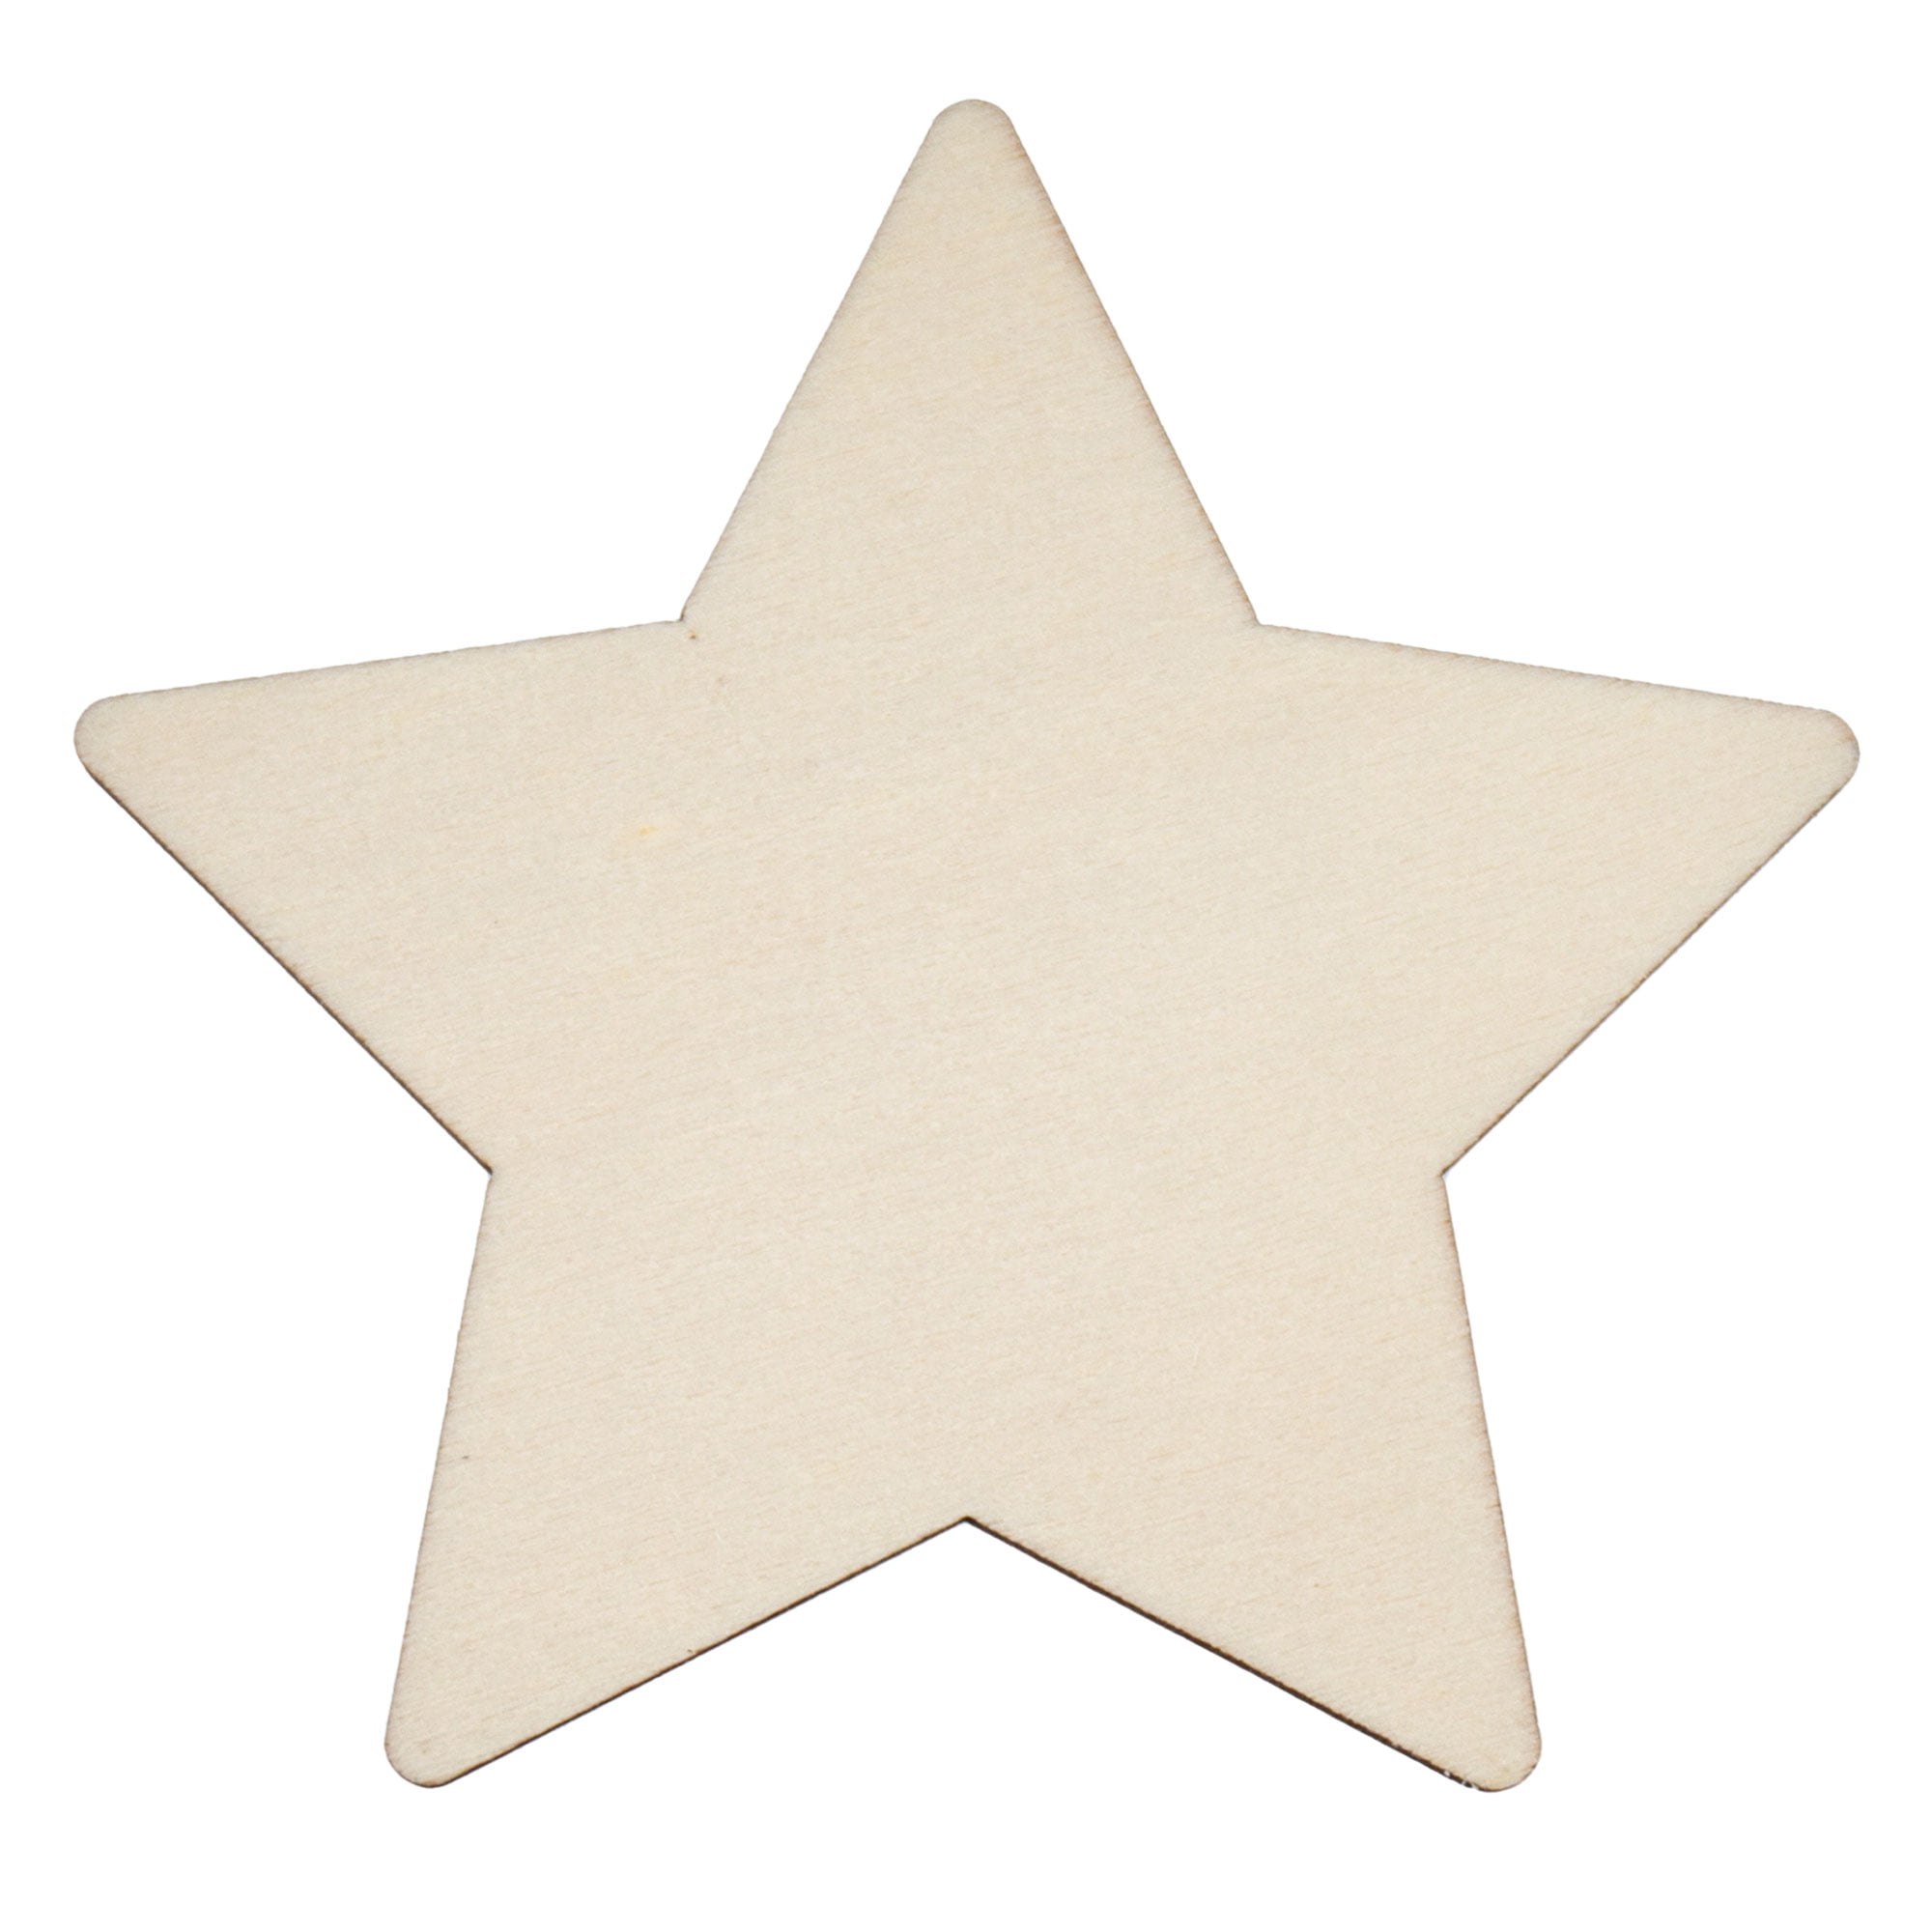 Wooden Stars With Holes, Wooden Star Cutout, Star Blanks, Wooden Shapes,  Wood Craft Shapes, Wooden Embellishments, Wooden Cut Out, 10 Pieces 